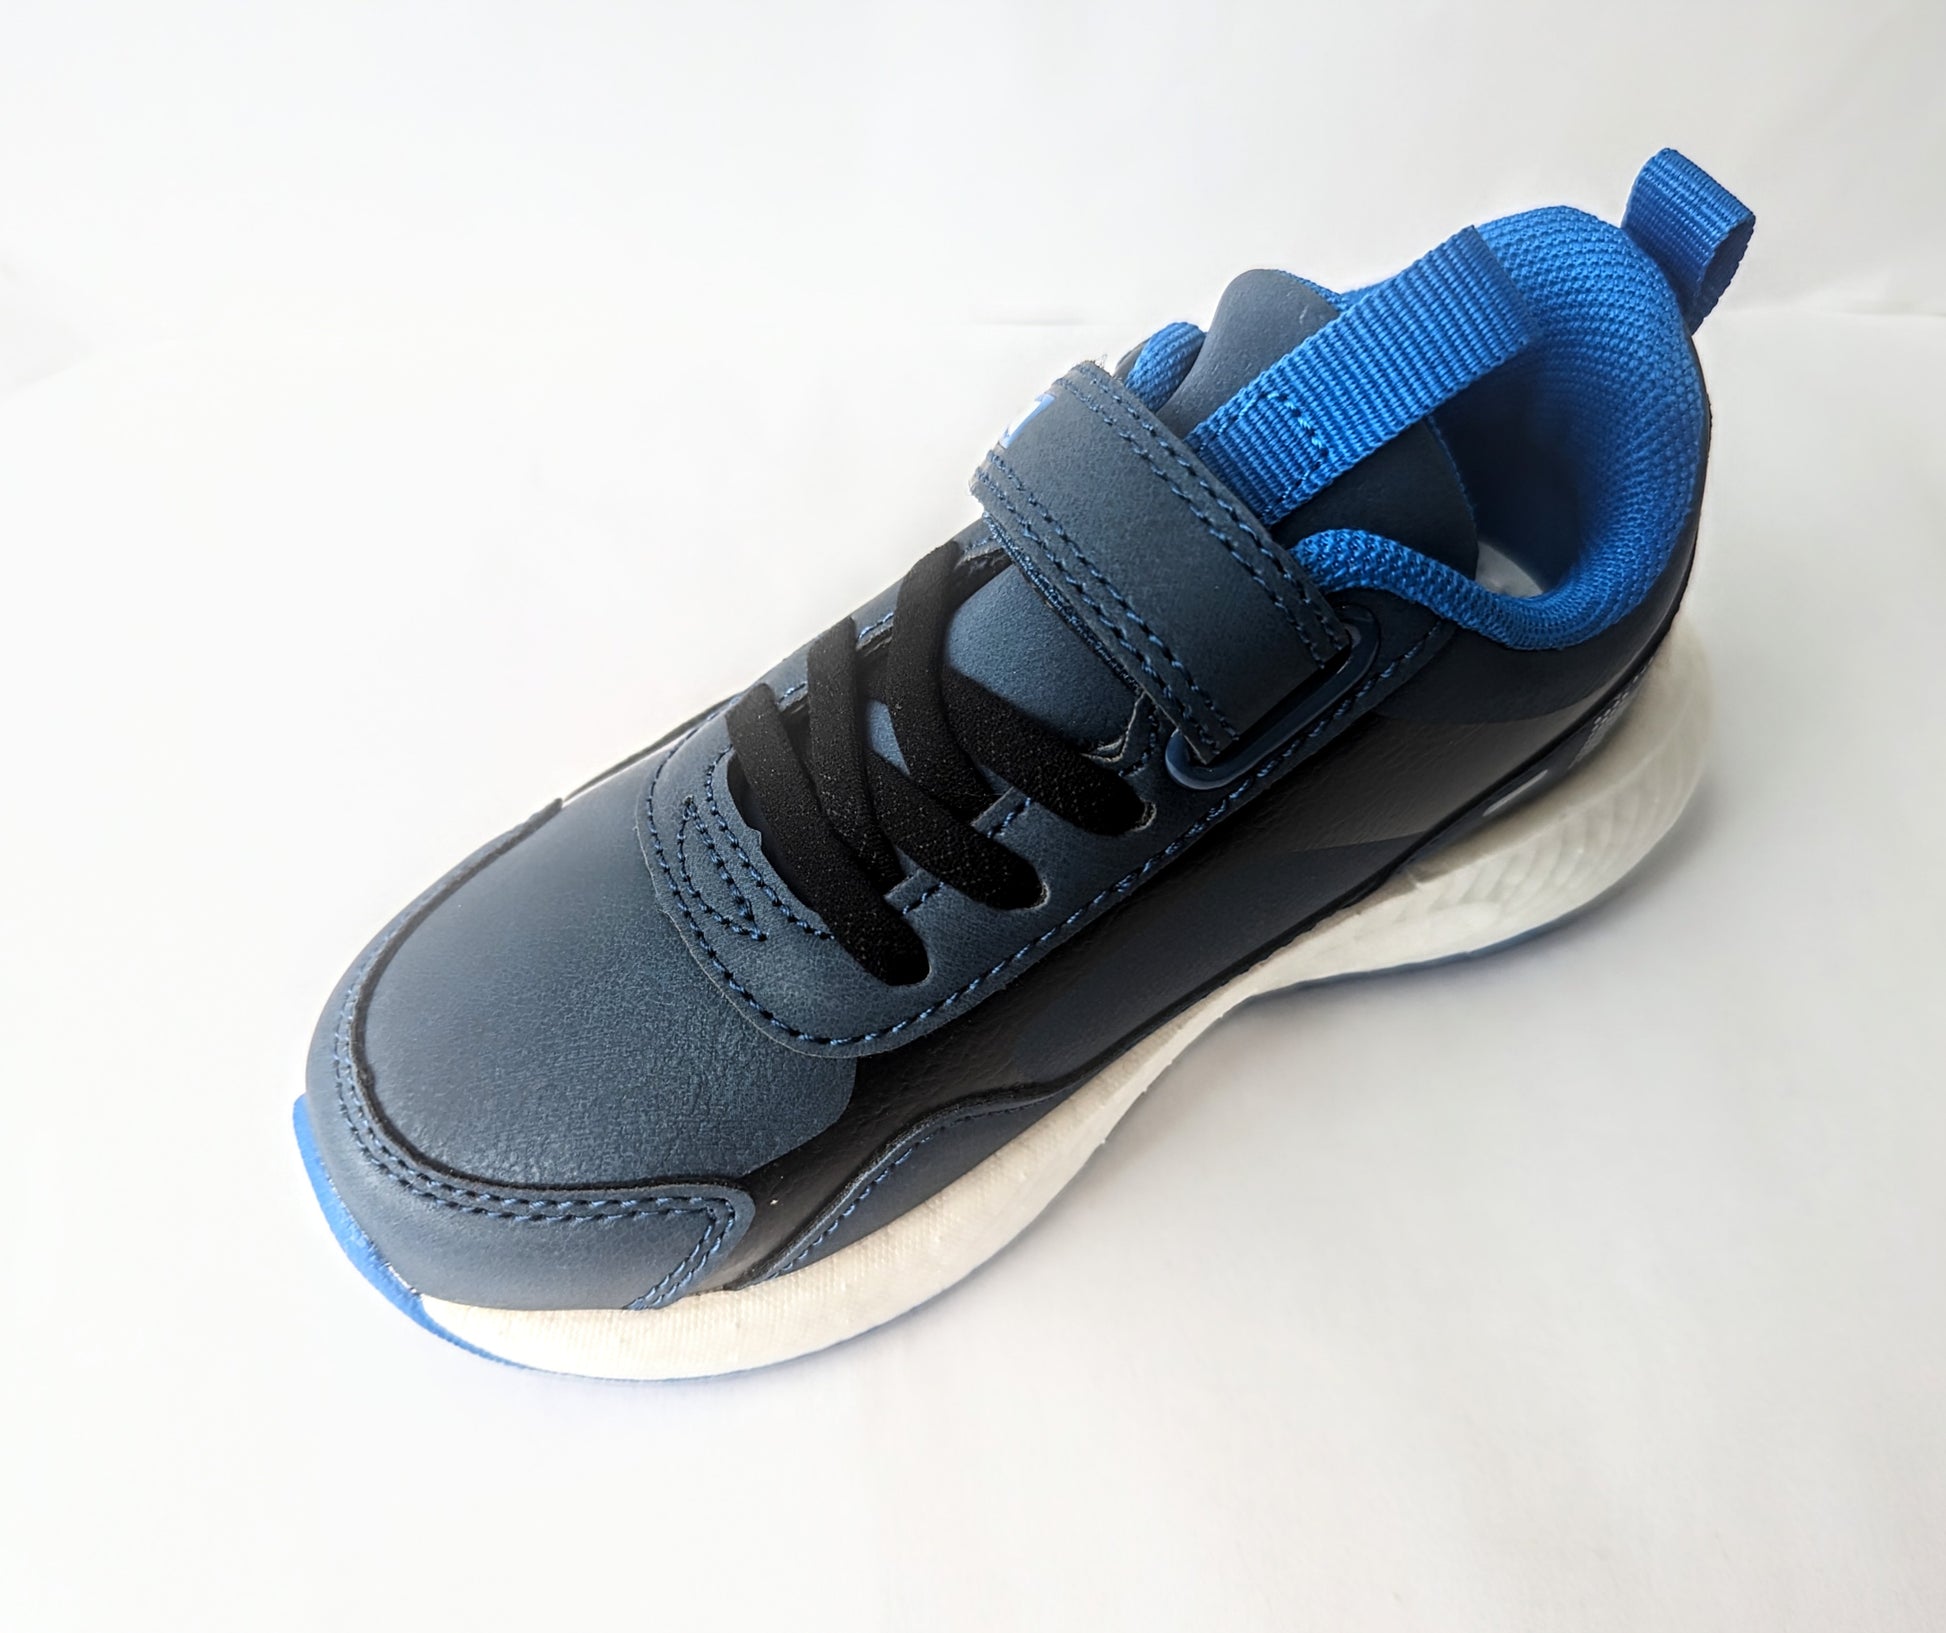 A boys trainer by Primigi, style B&G Rapid 4962511, in navy and blue with elastic lace and velcro fastening. Angled view from above.